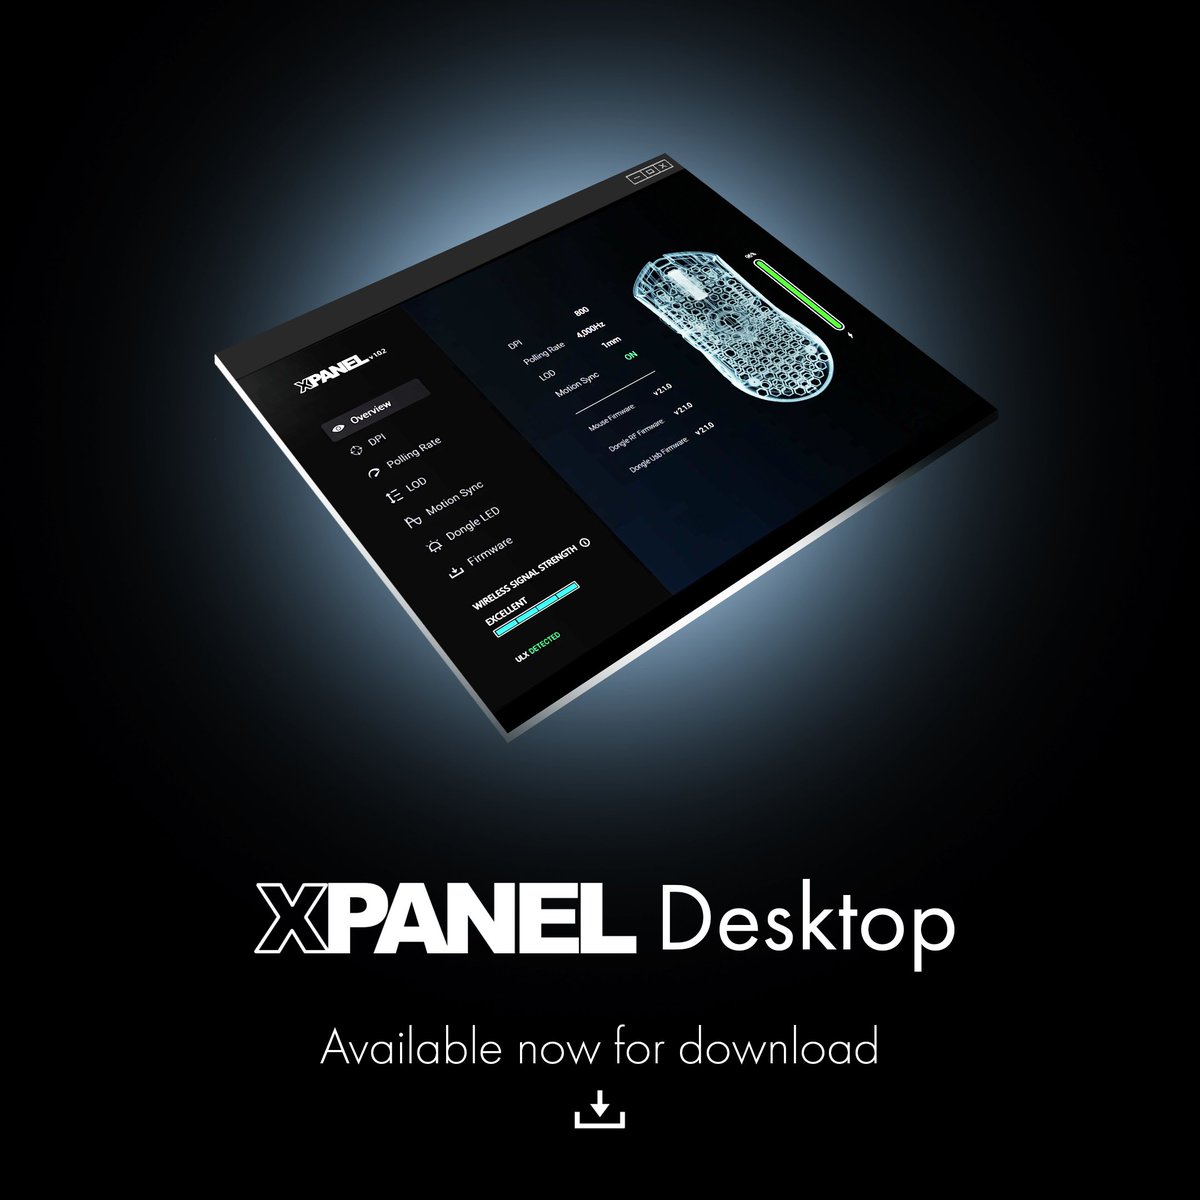 If your tournament organizer does not allow internet access, or if you simply need offline access to xpanel… ℹ️ You can now download a Desktop version of xpanel. Simply go to the standard web version of xpanel and follow the download link on the left side bar.